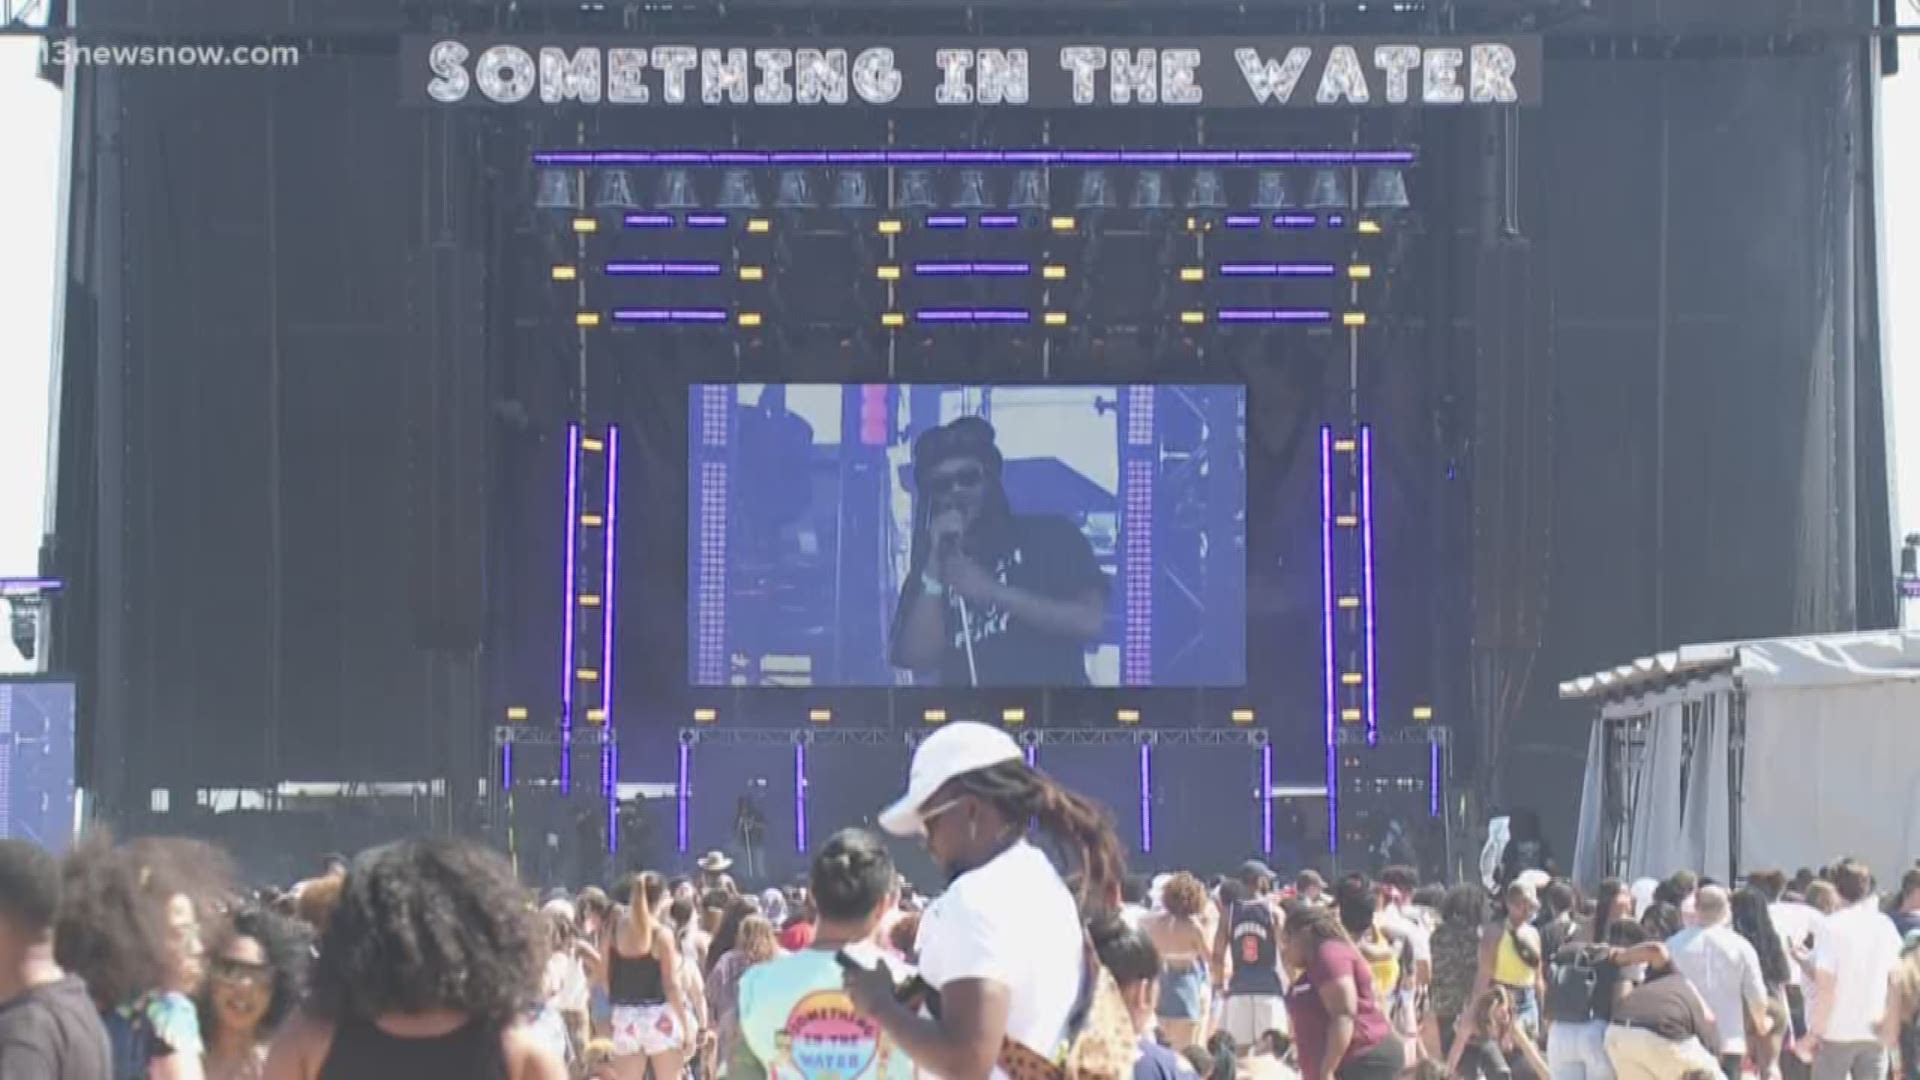 Organizers say more events will be available and 20 more artists will be performing for Something in the Water 2020.